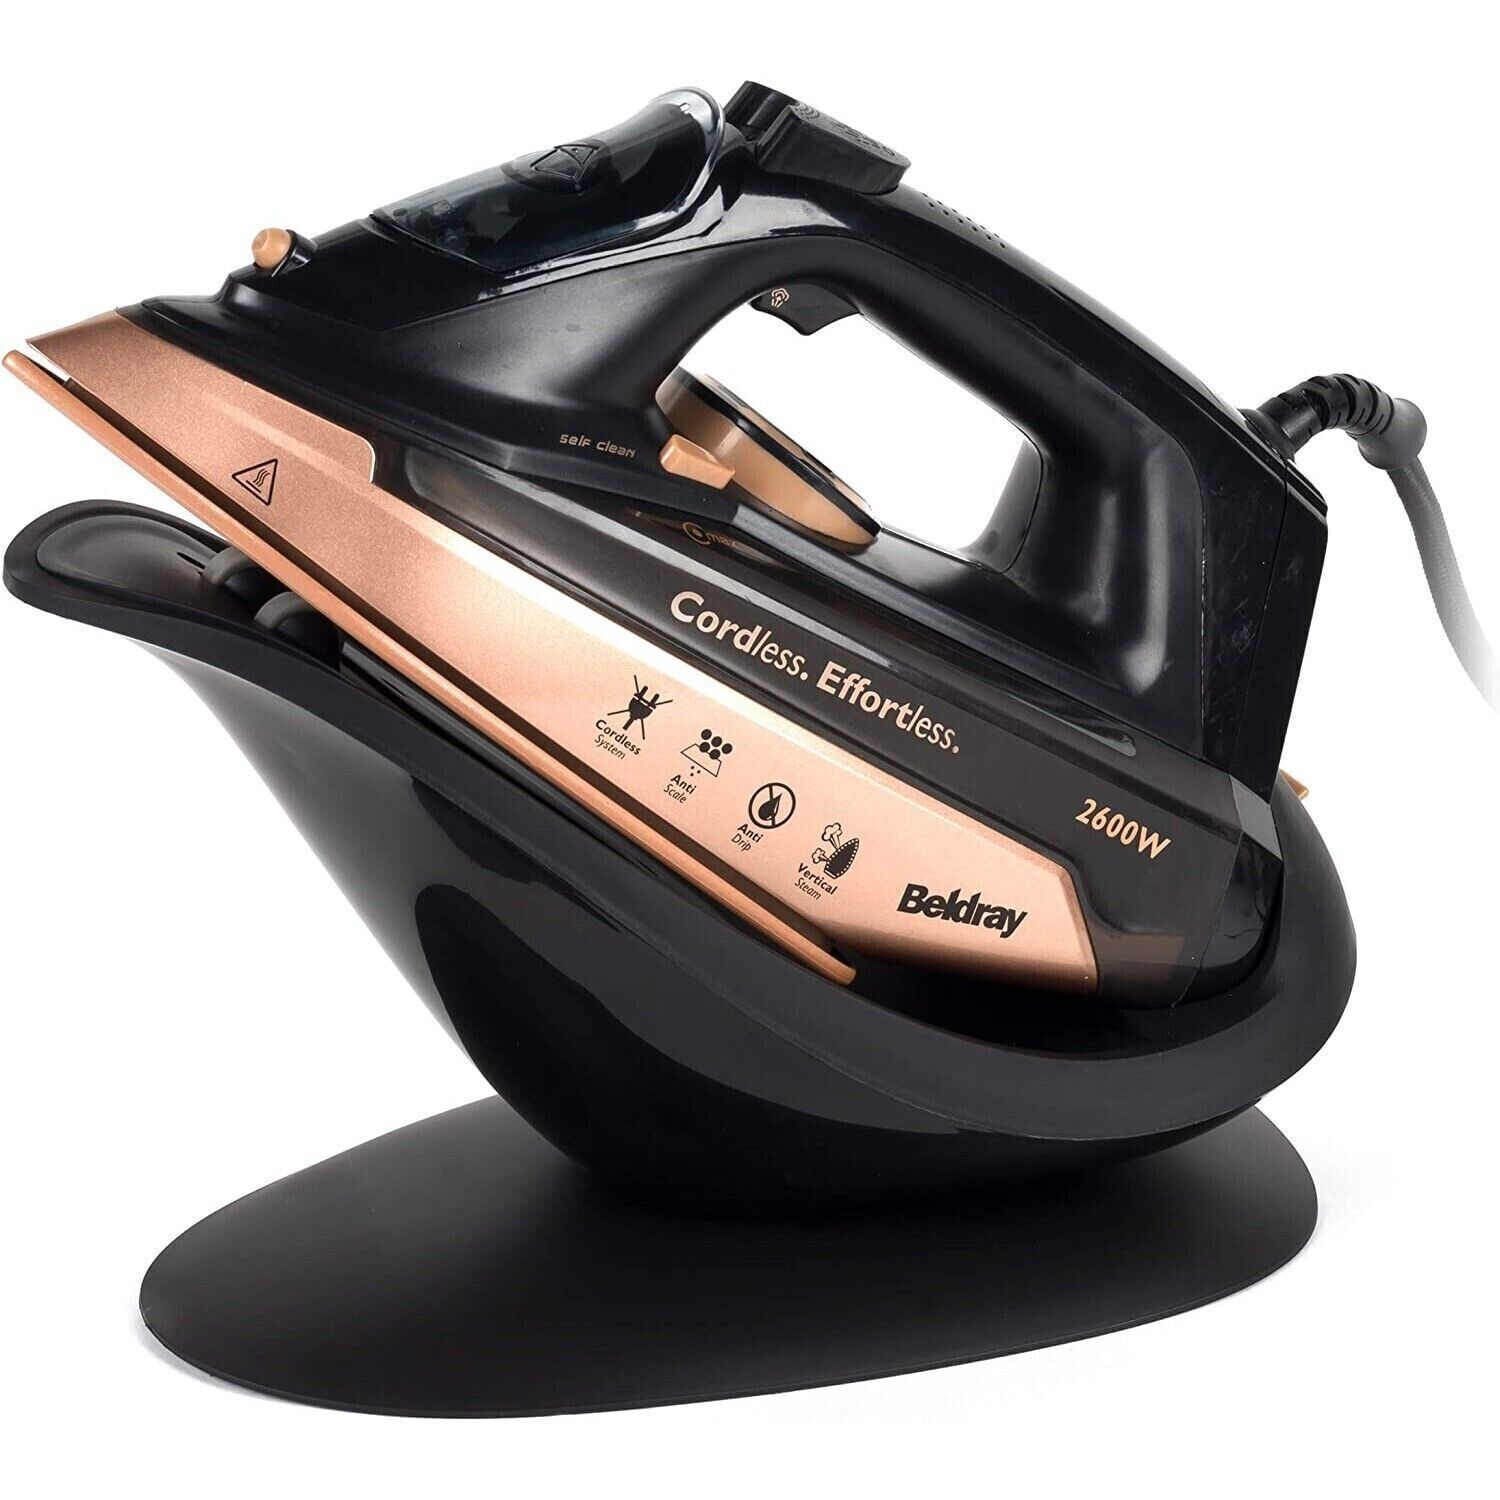 Beldray Cordless Steam Iron With Stand 2 in 1 300 ml Tank 2600 W Rose Gold/Black